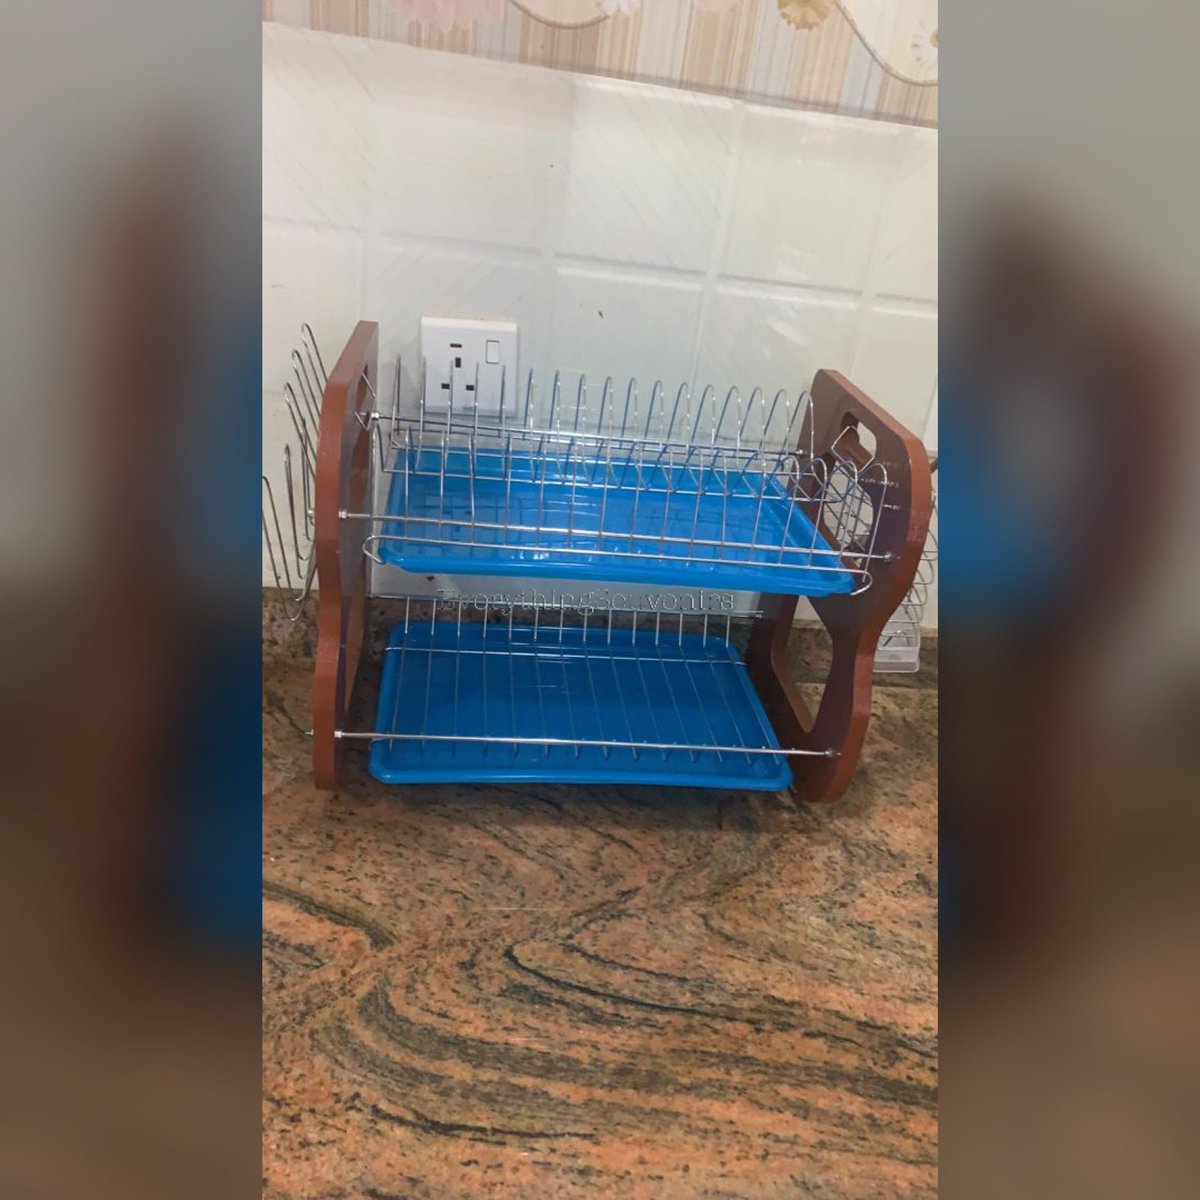 2 layer Dish drainer available..Price- 5000Please RT